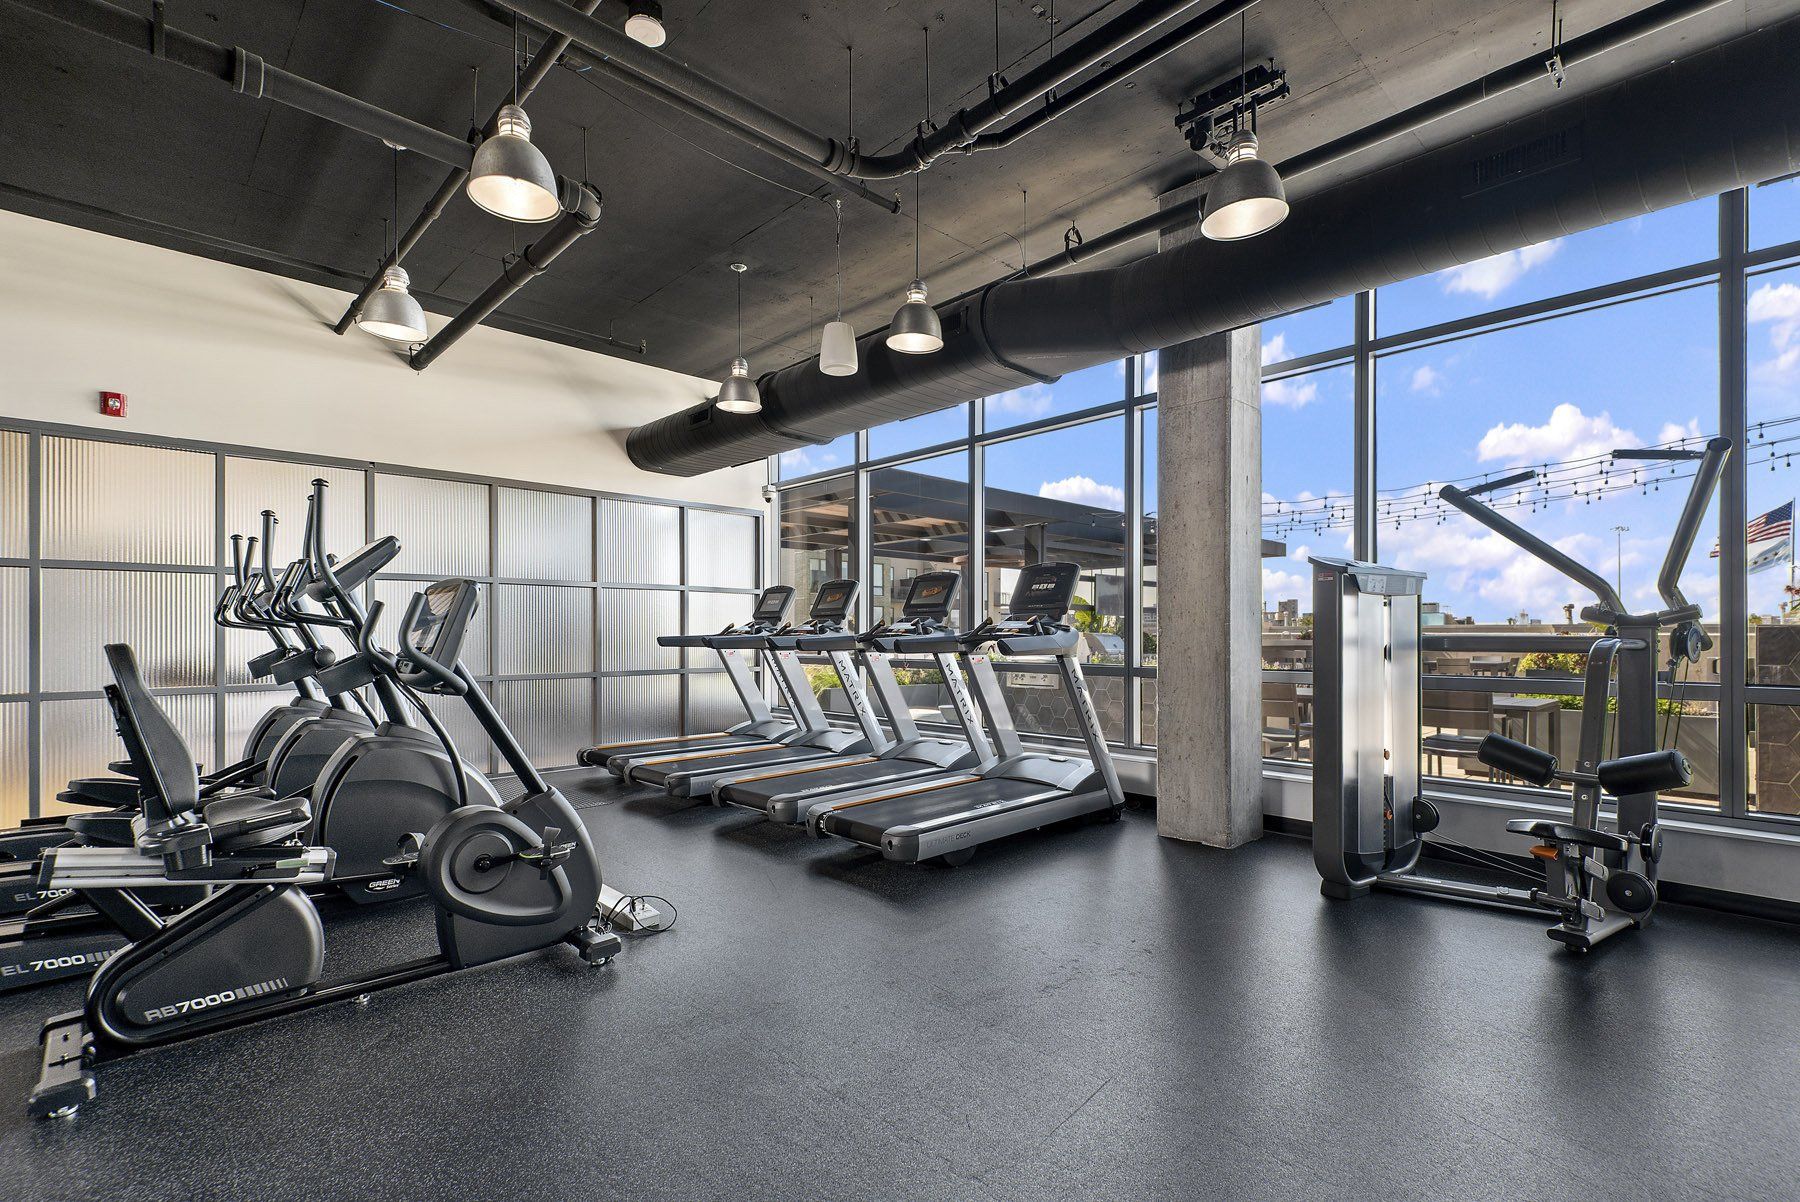 Fitness center with treadmills at Reside on Green Street.